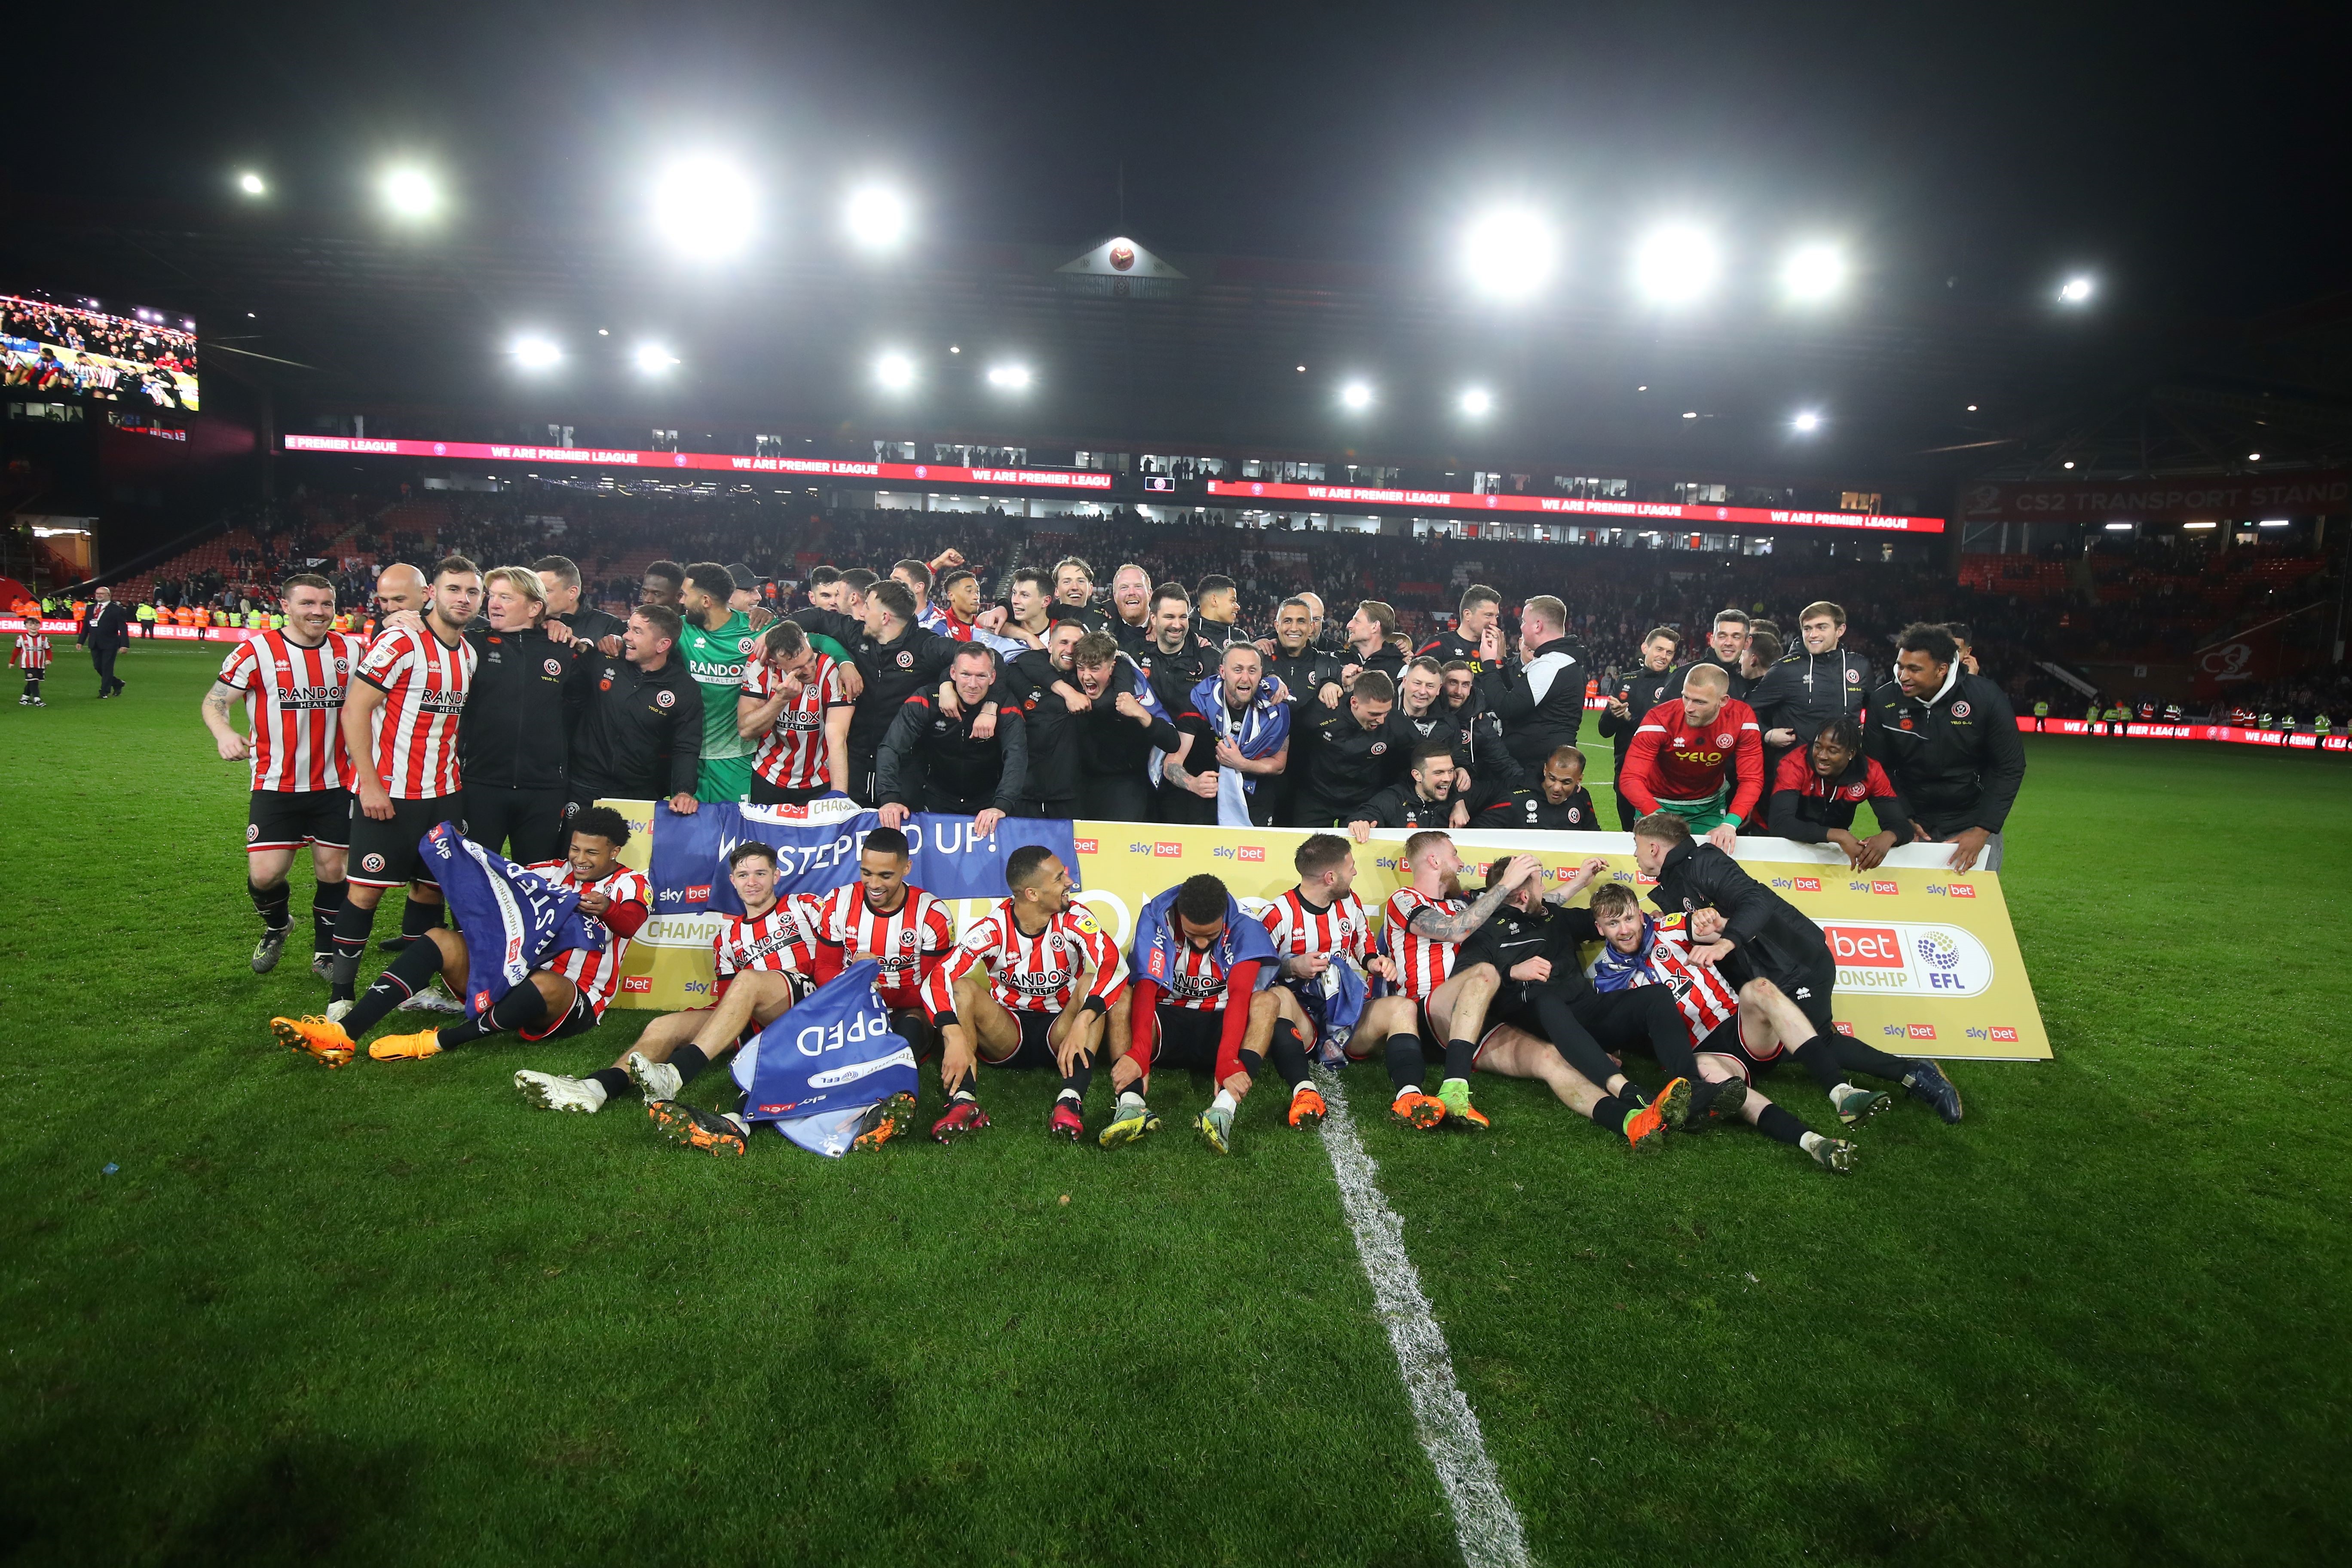 Sheffield United football players, huddled together for a picture on the pitch inside the stadium